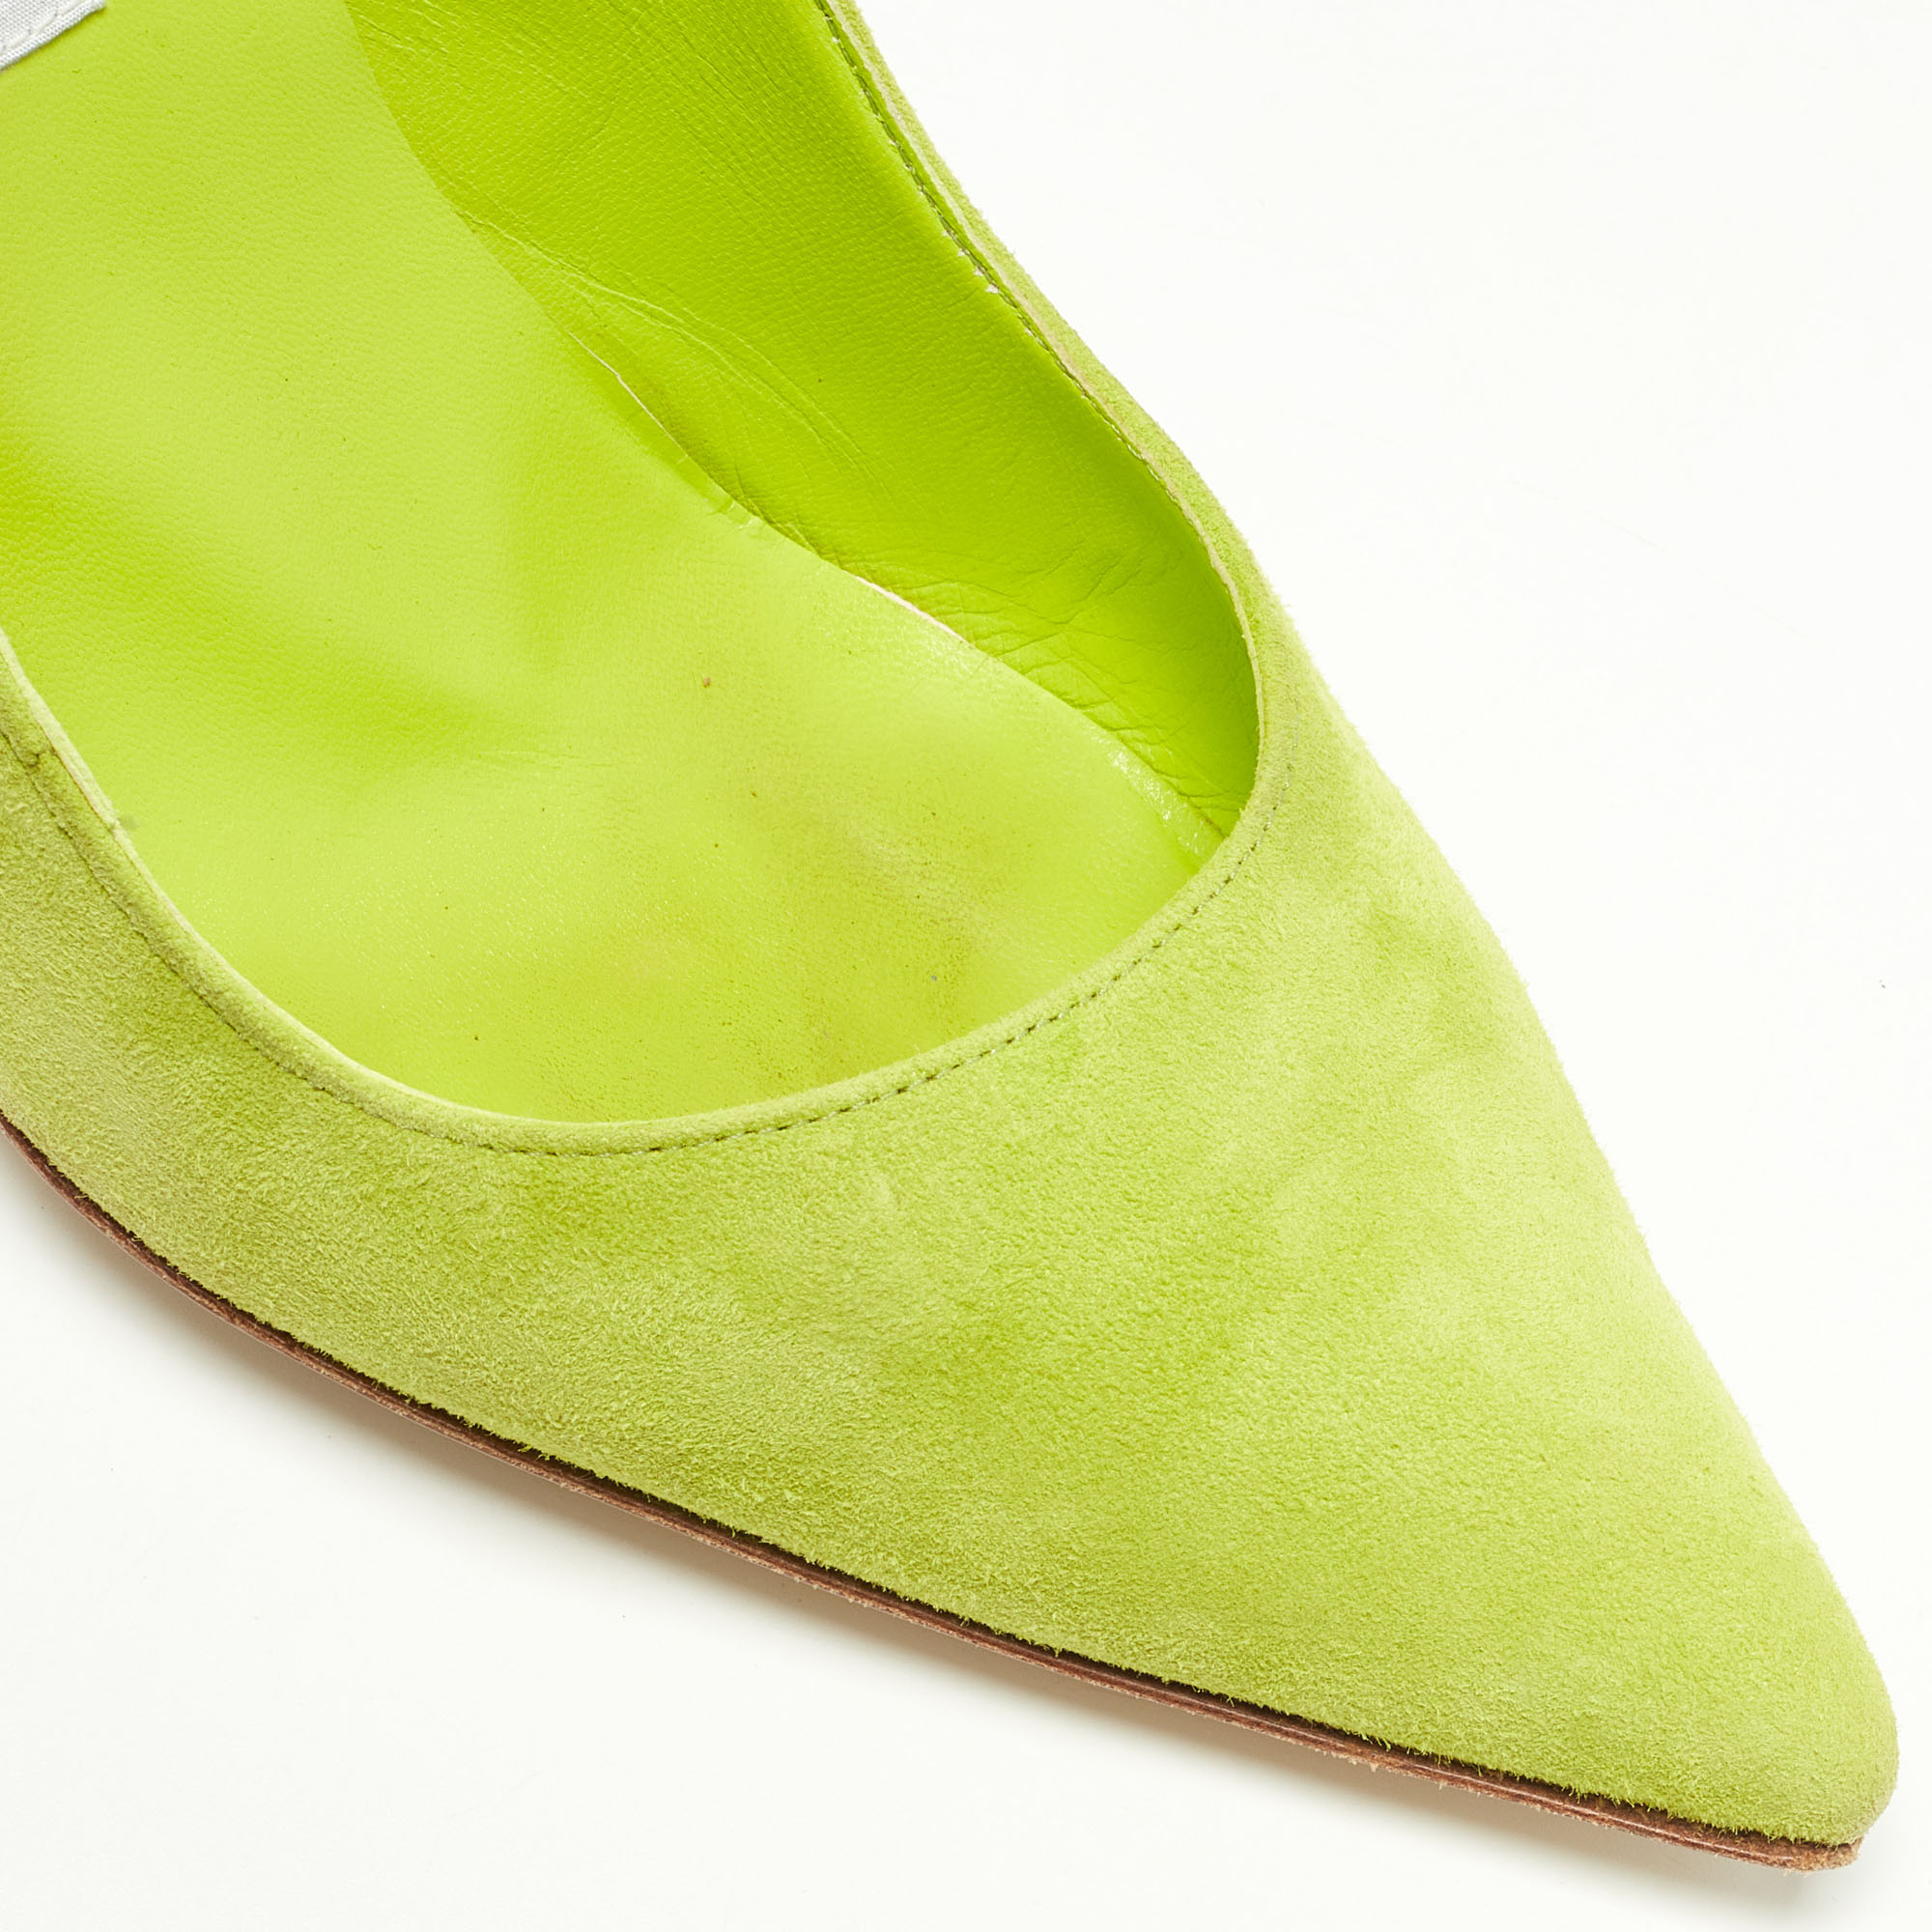 Manolo Blahnik Green Suede BB Pointed Toe Pumps Size 39